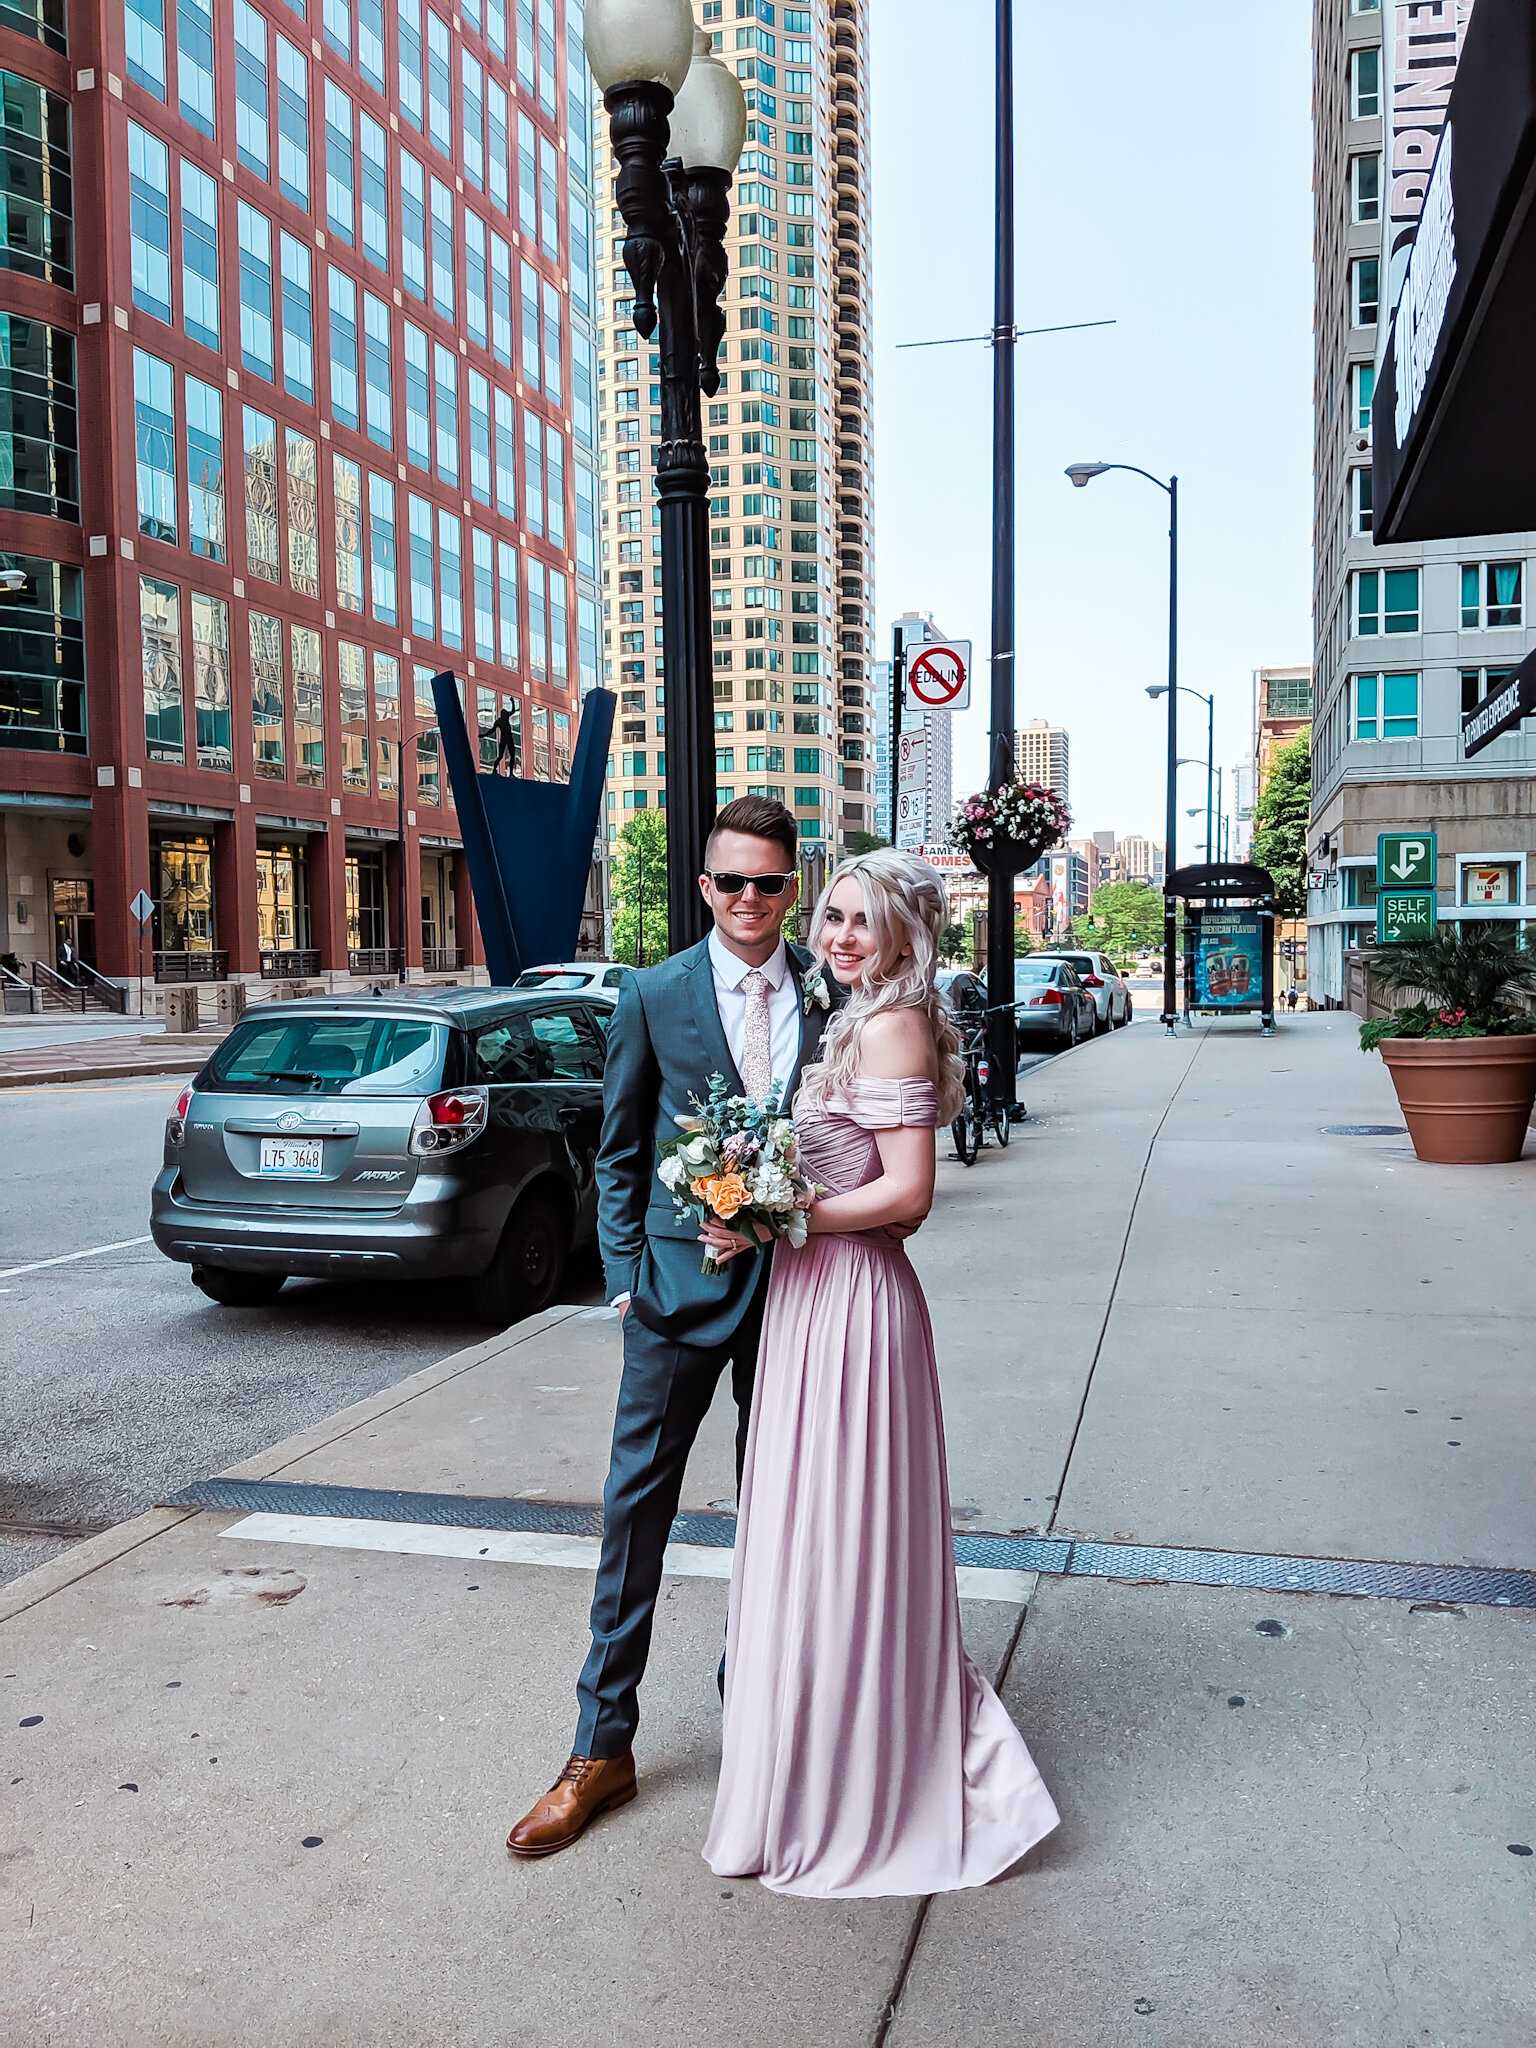 Choosing bridal party styles | Chicago Bridesmaid and Groomsmen Style